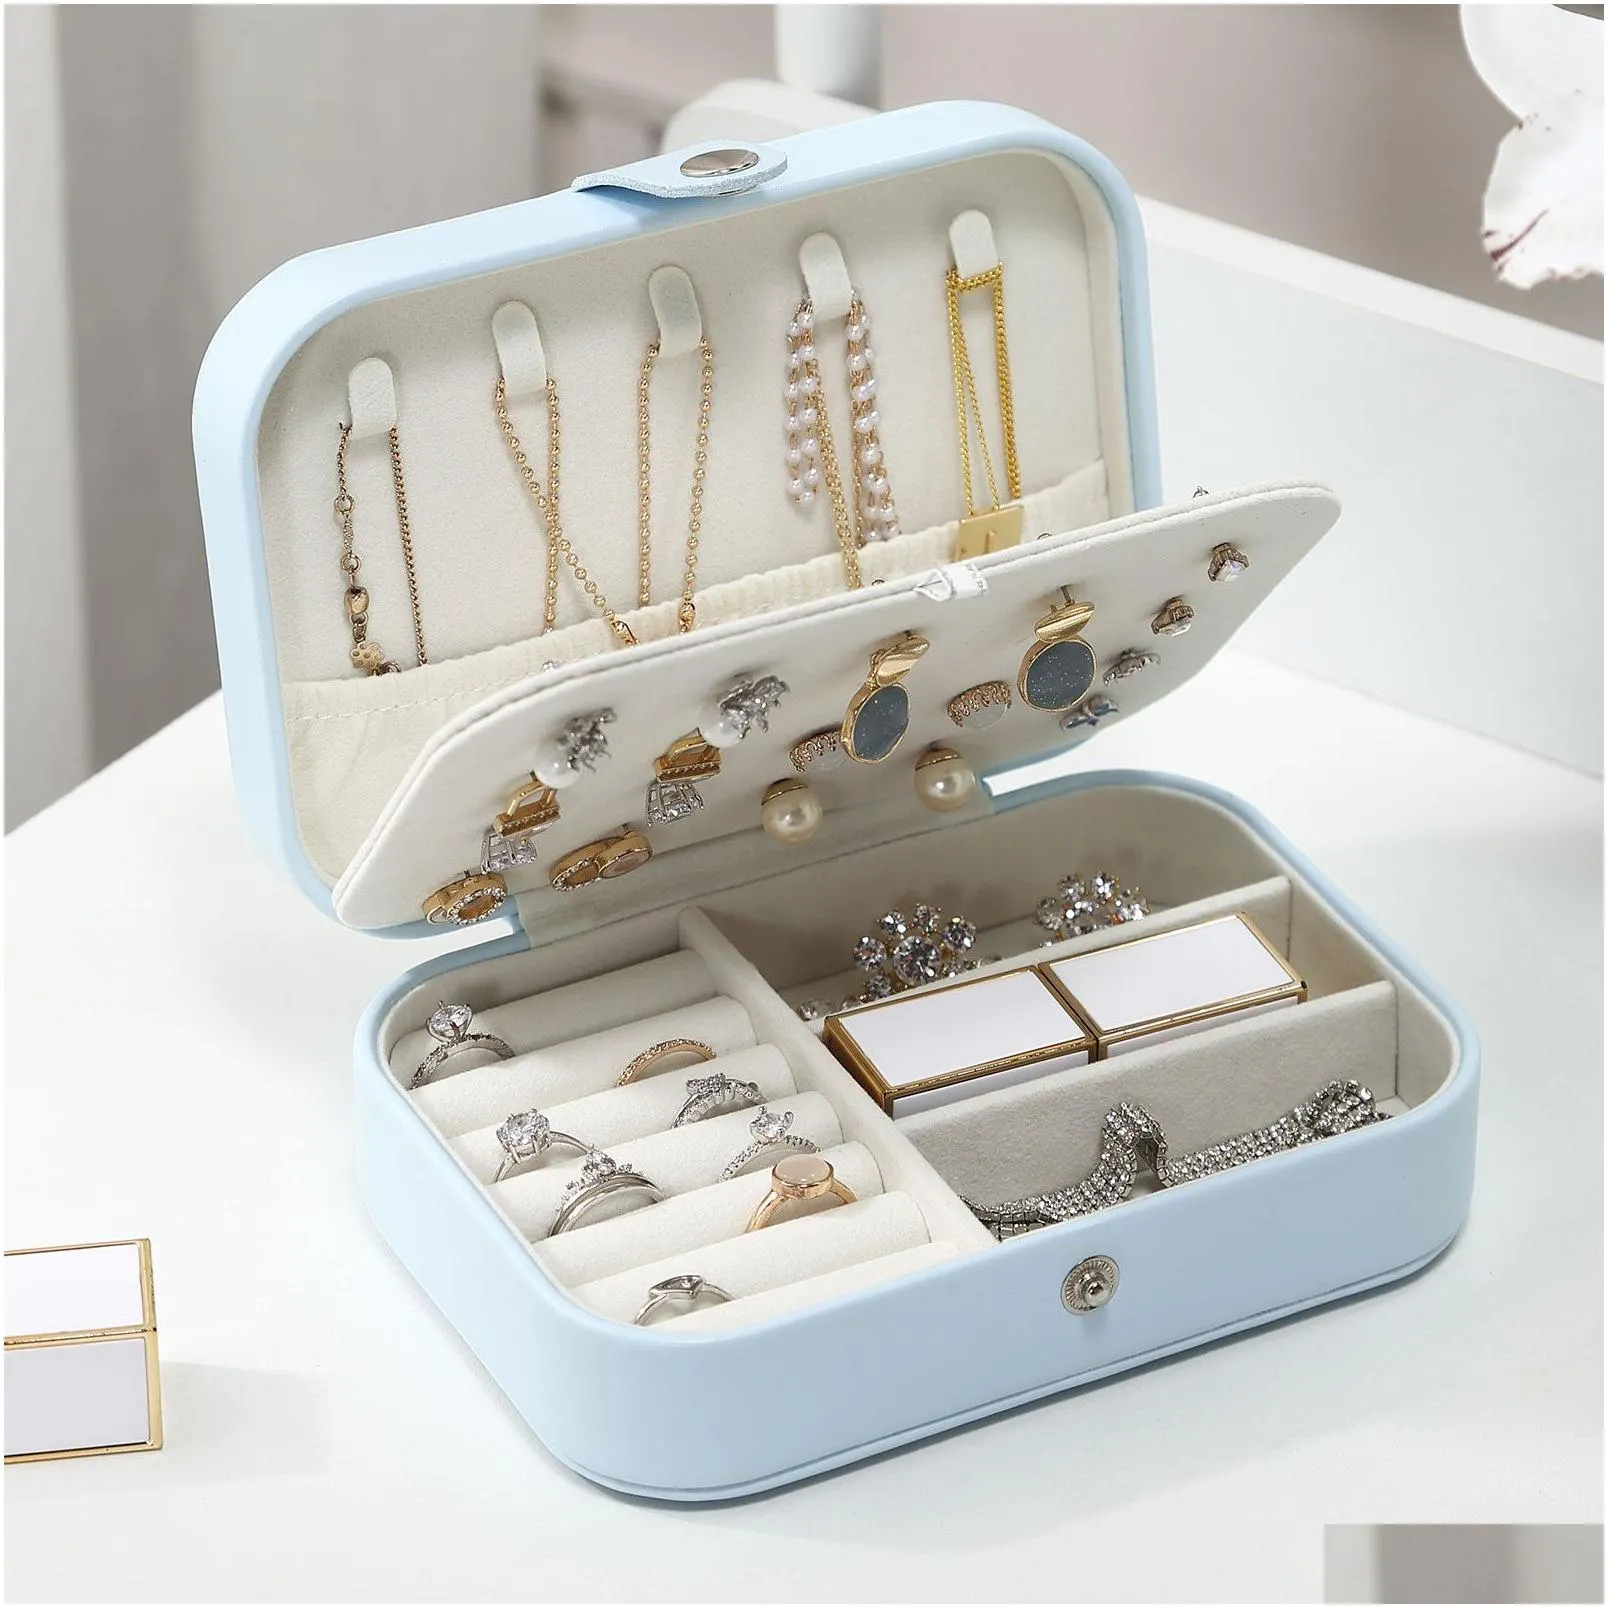 Storage Boxes & Bins 8 Colors Double Layer Pu Smooth Storage Box Convenient Earrings Necklaces Rings Cosmetics Jewelry Boxes 16X11X5 C Dhjlo